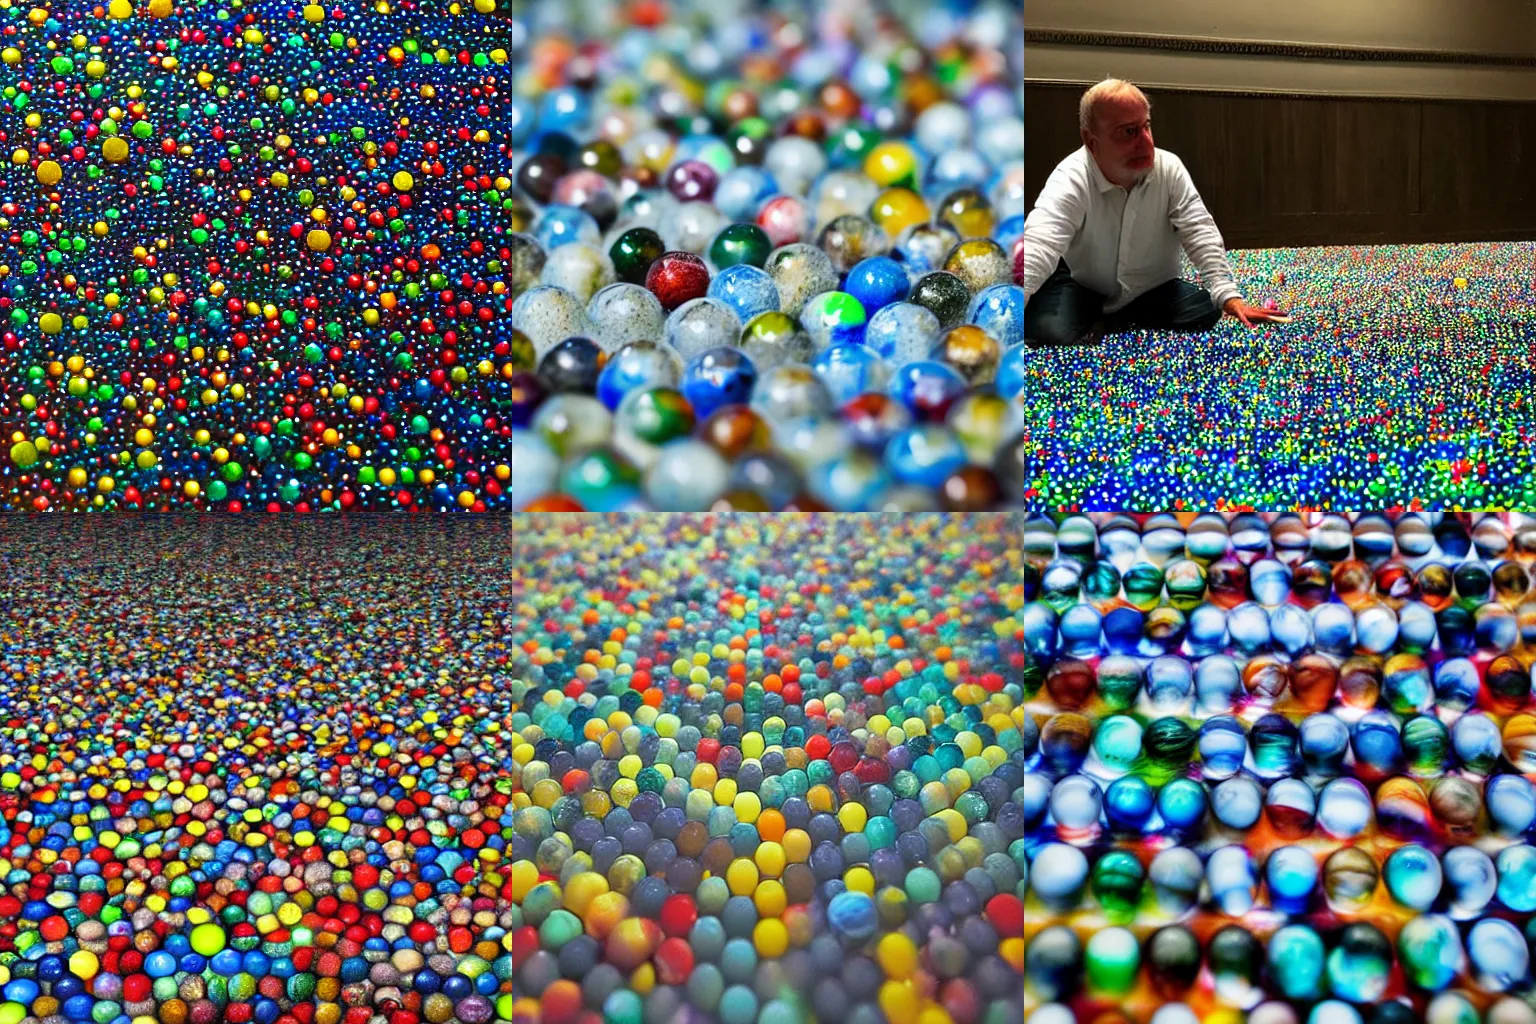 Prompt: Mozes walking in a landscape with a floor of glass marbles that each have a universe inside